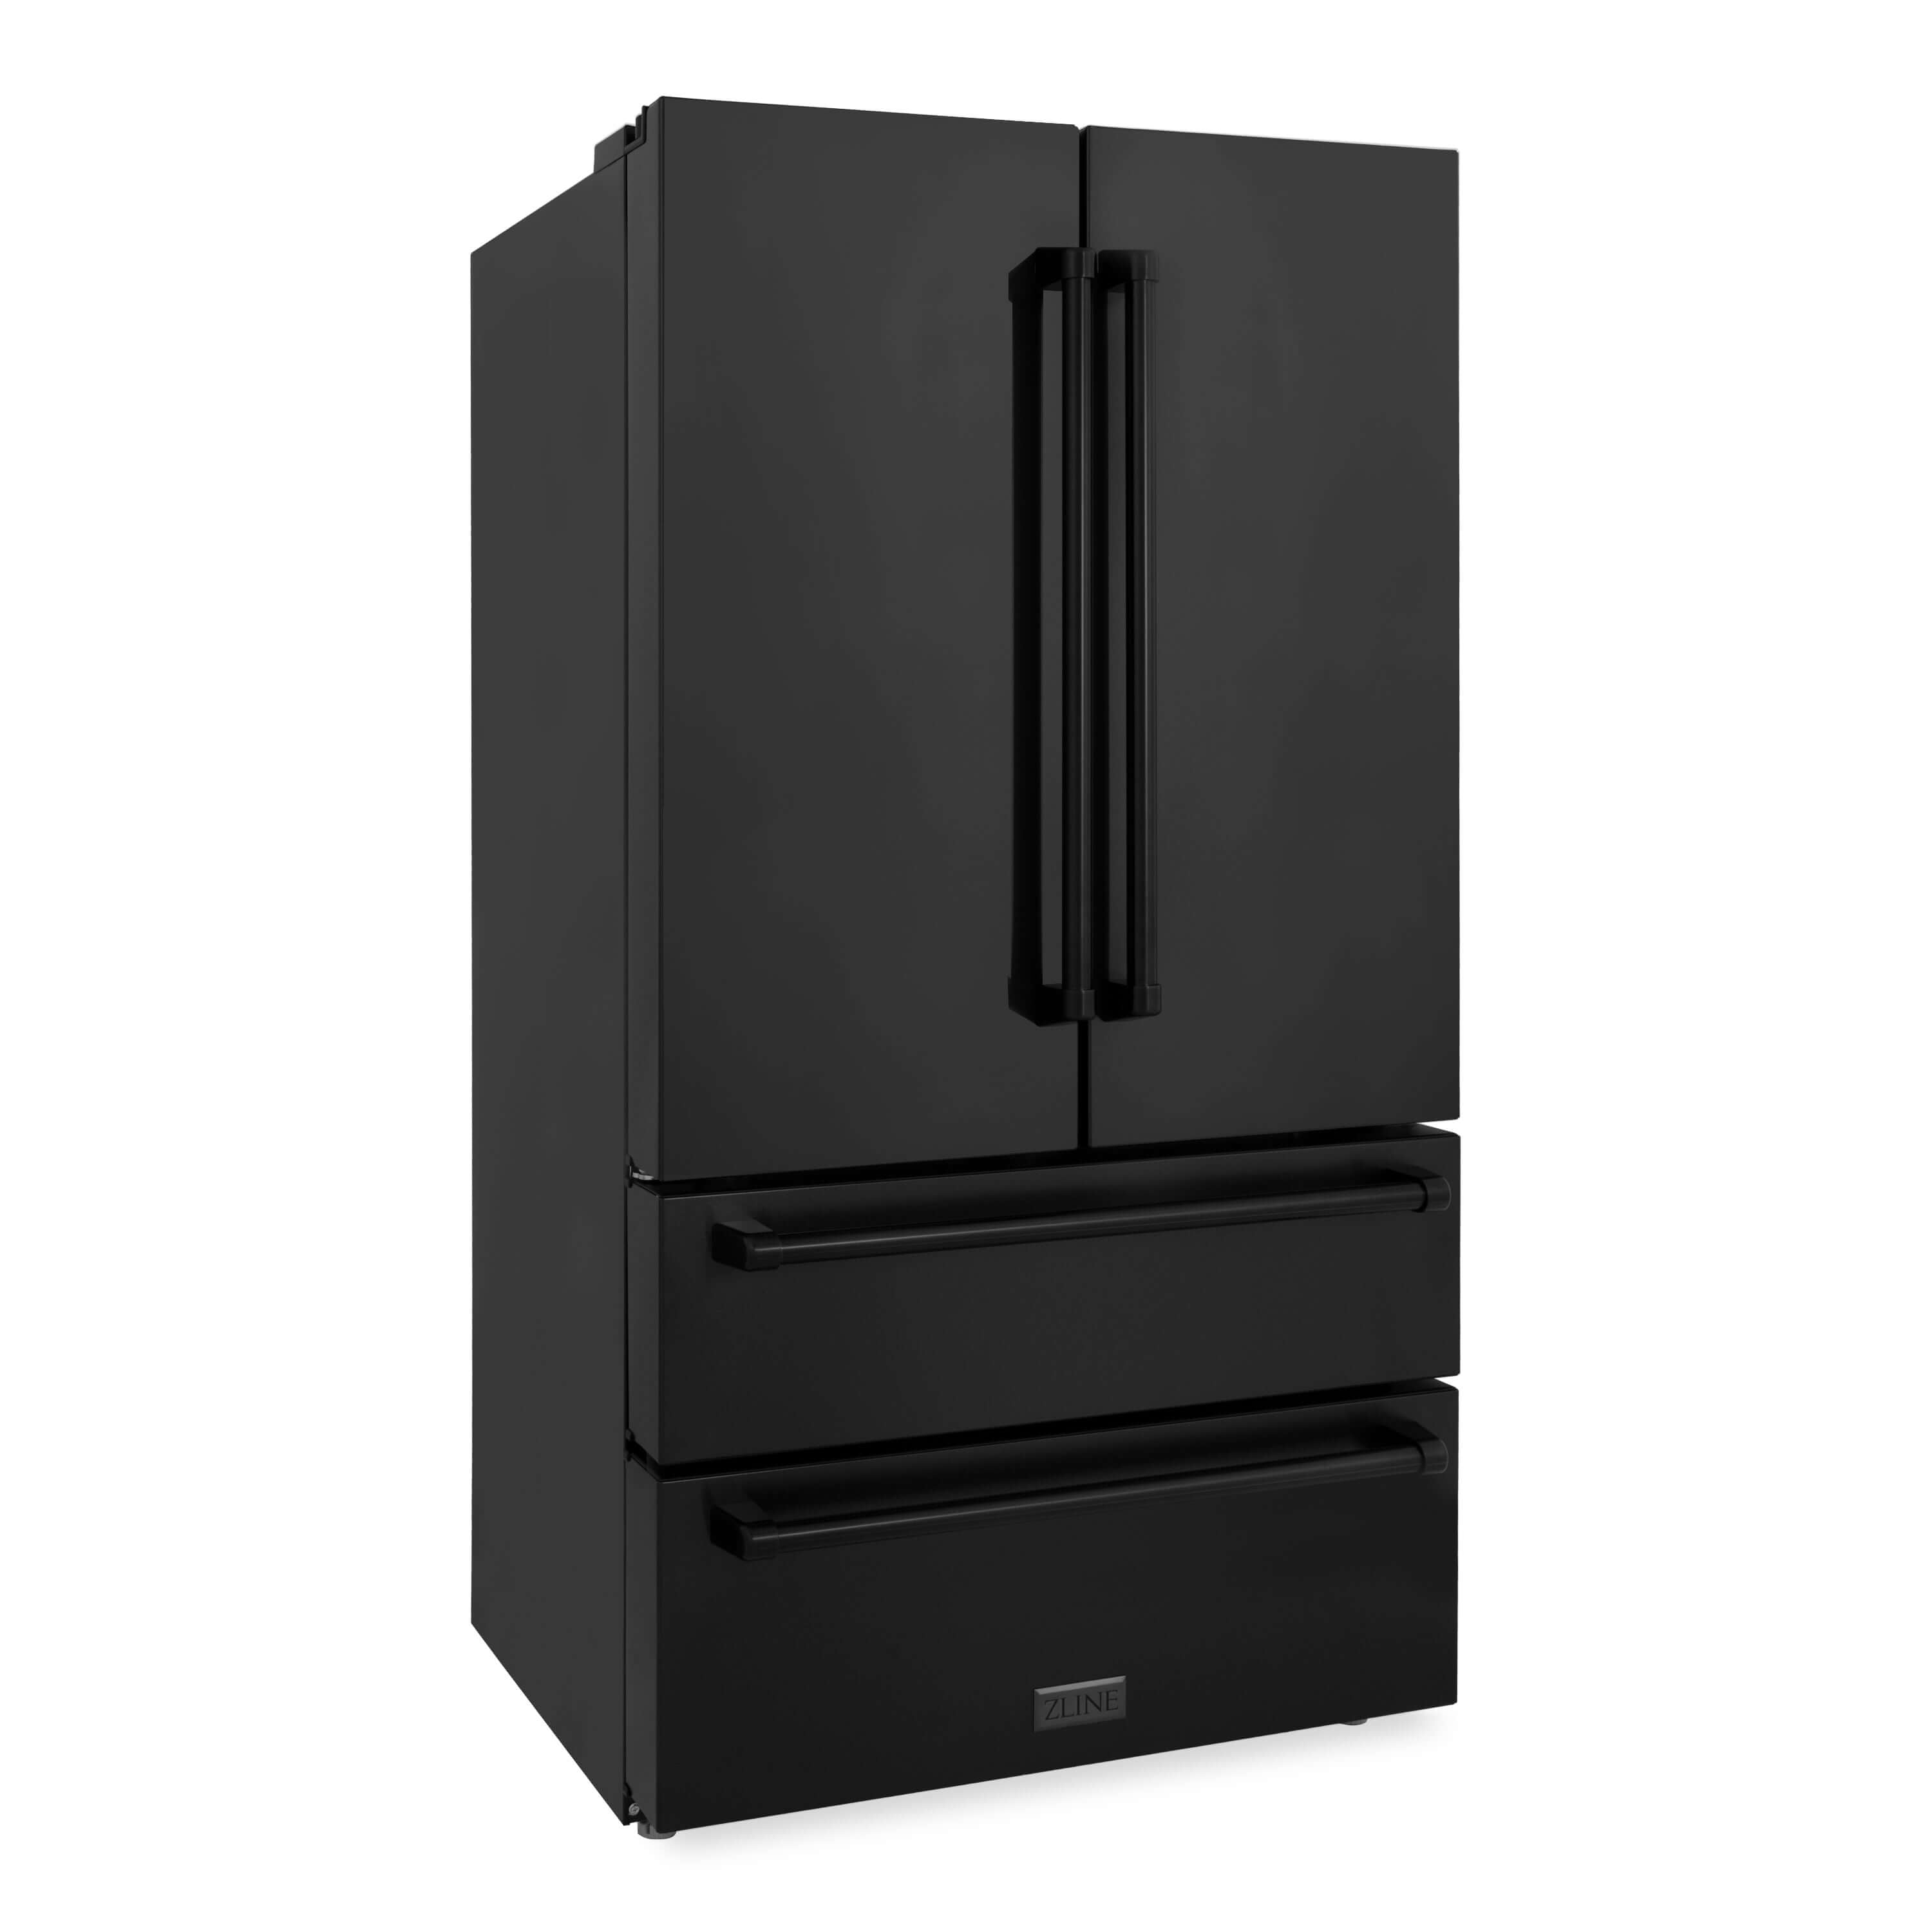 ZLINE 36 in. Freestanding French Door Refrigerator with Ice Maker in Black Stainless Steel (RFM-36-BS) side, closed.